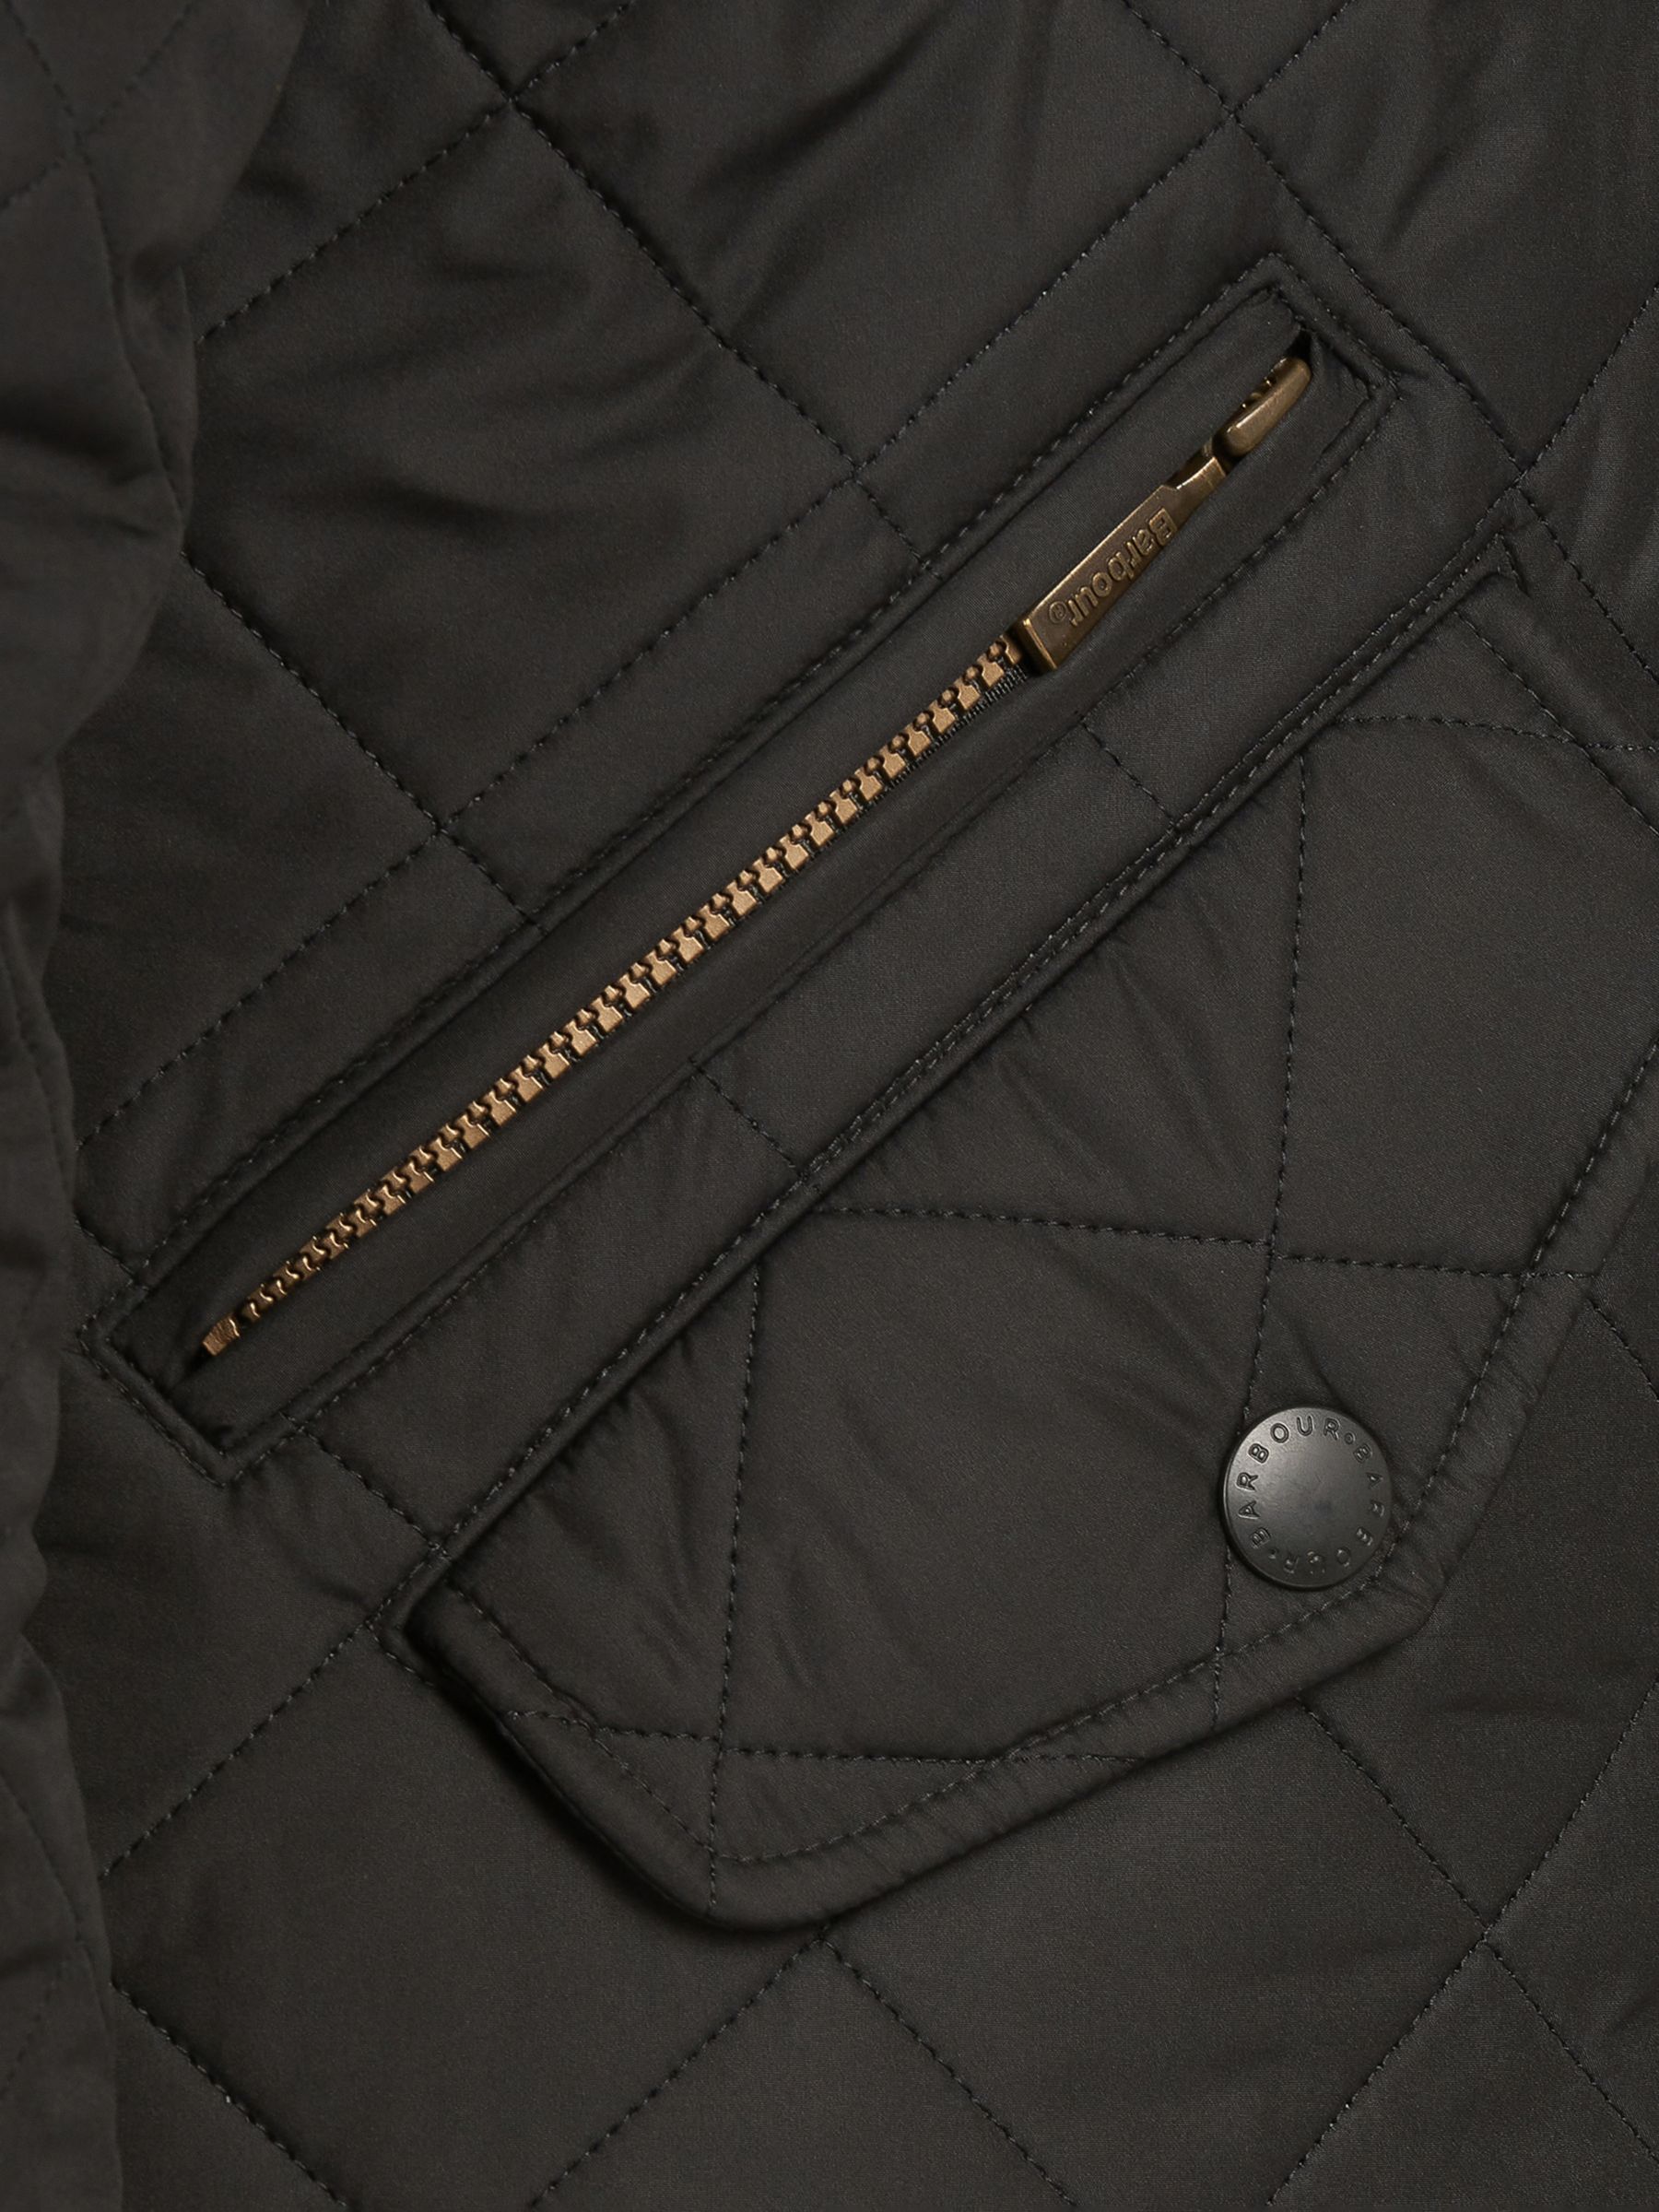 Barbour Lifestyle Powell Quilted Jacket, Black at John Lewis & Partners